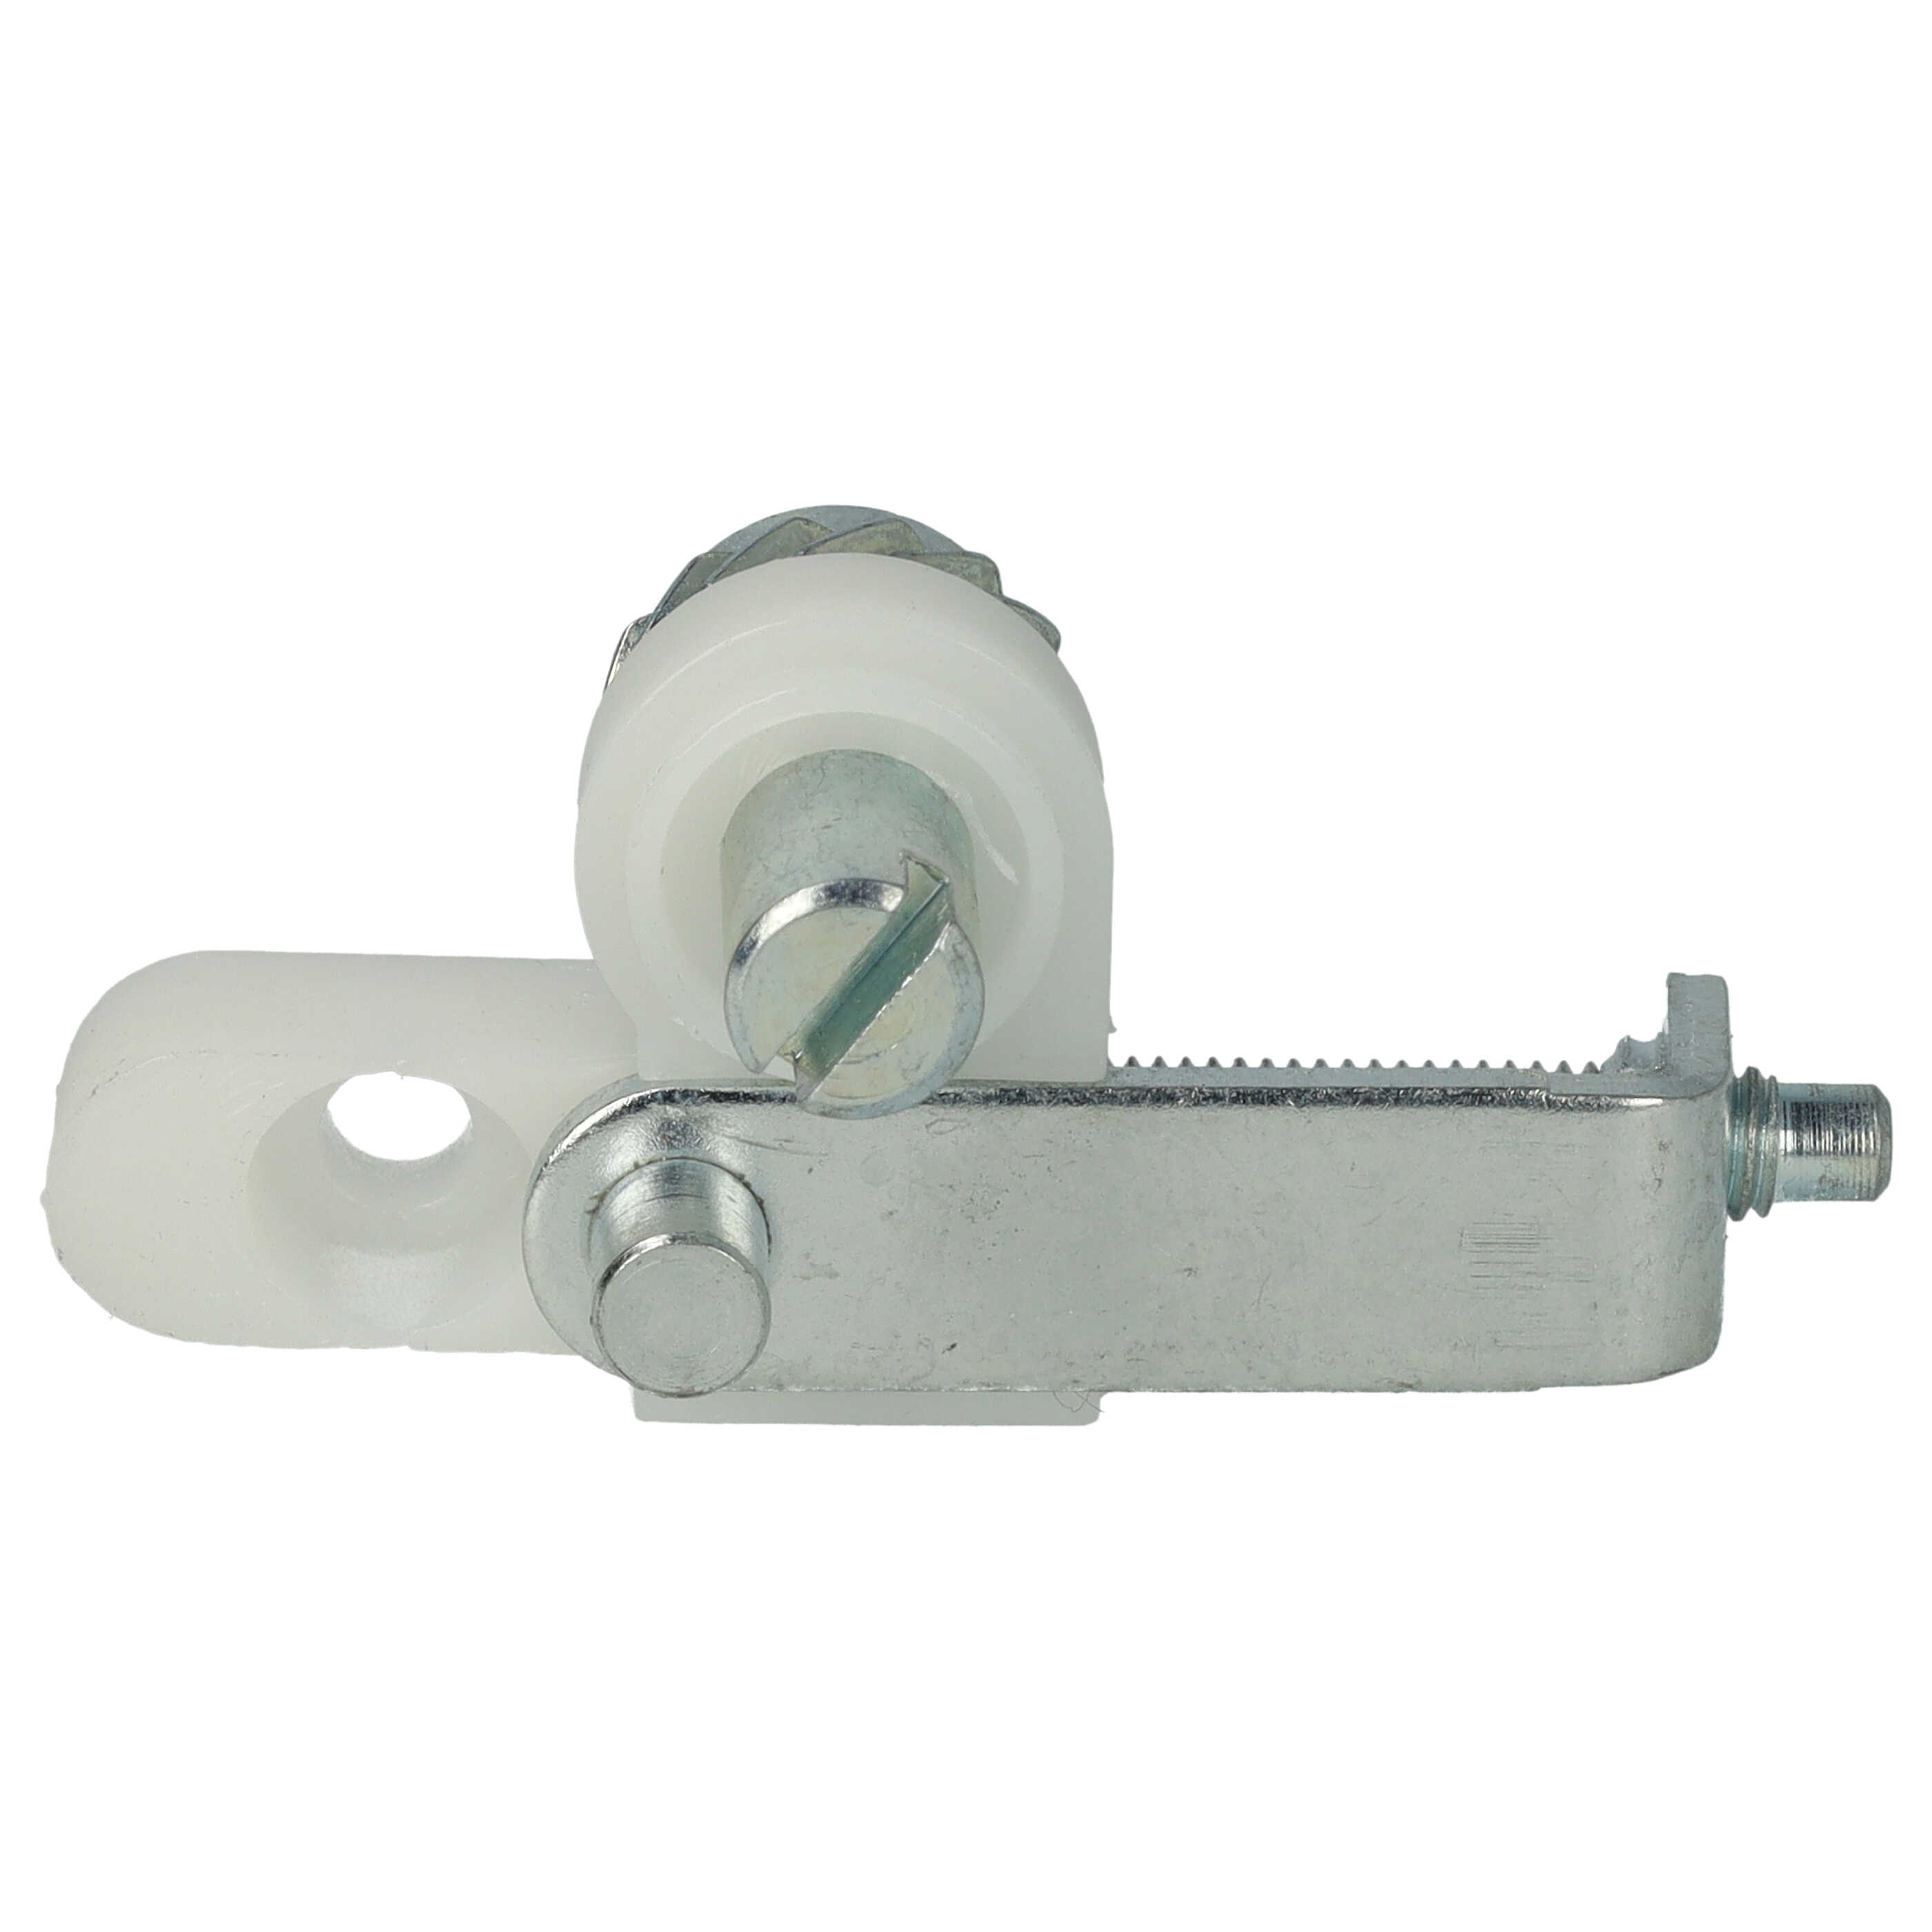 Side-Mounted Chain Tensioner, Adjusting Screw suitable for Stihl MS 170 Power Saw etc.